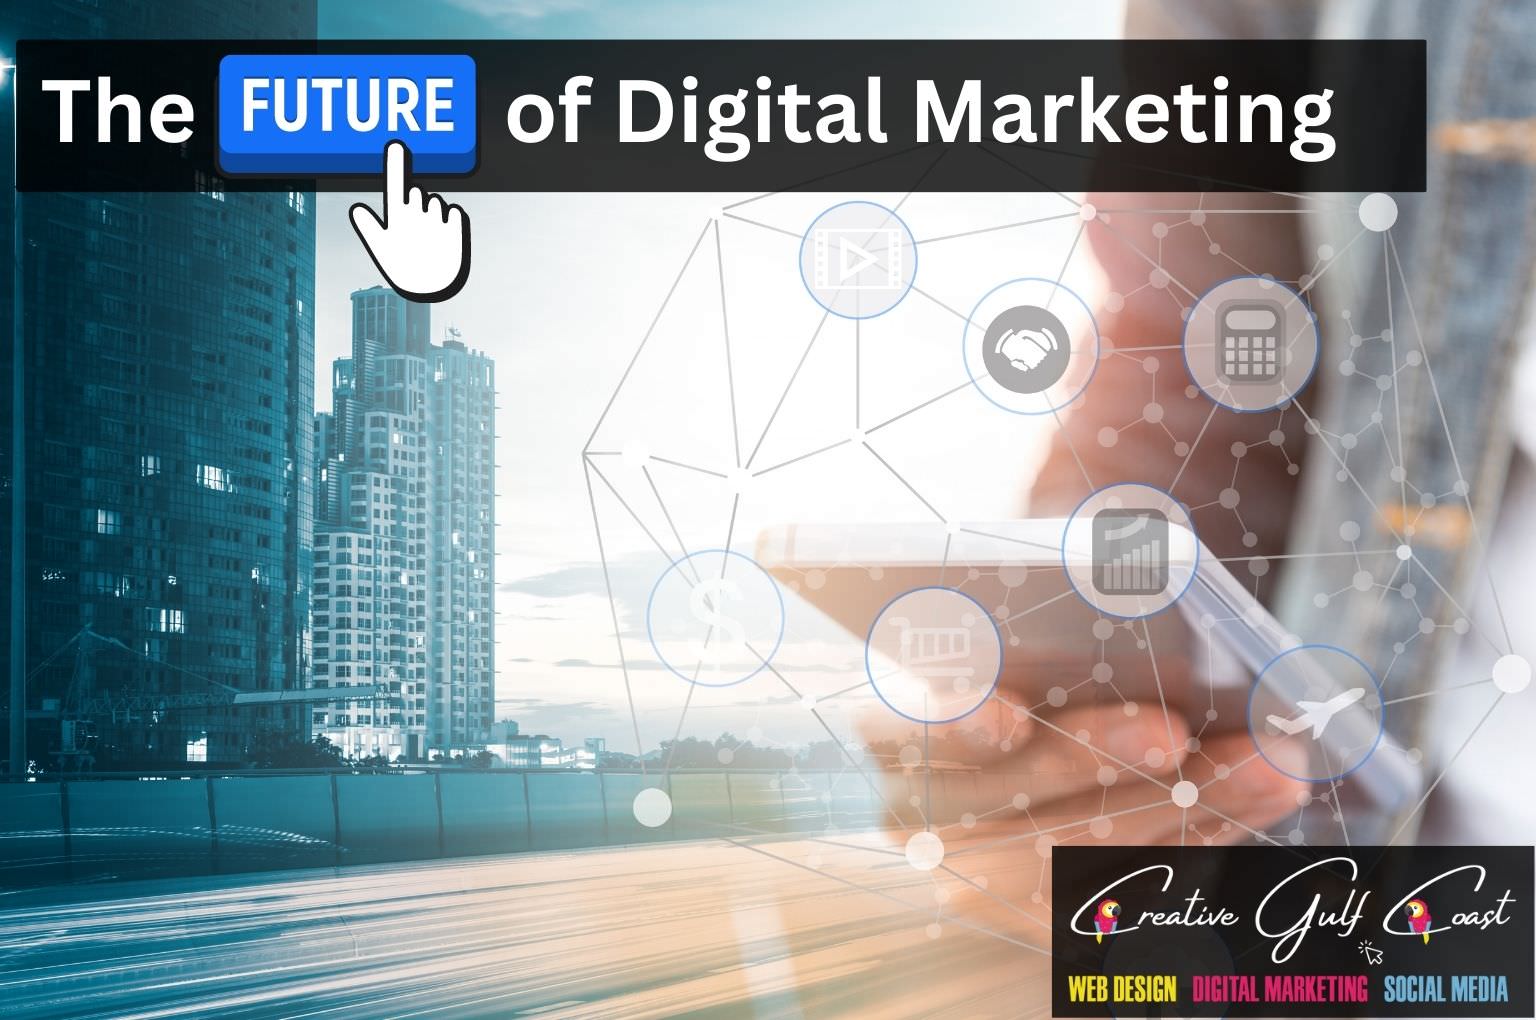 The Future of Digital Marketing - Trends and Predictions by Philipp Creative Gulf Coast Agency for Digital Marketing In Tampa